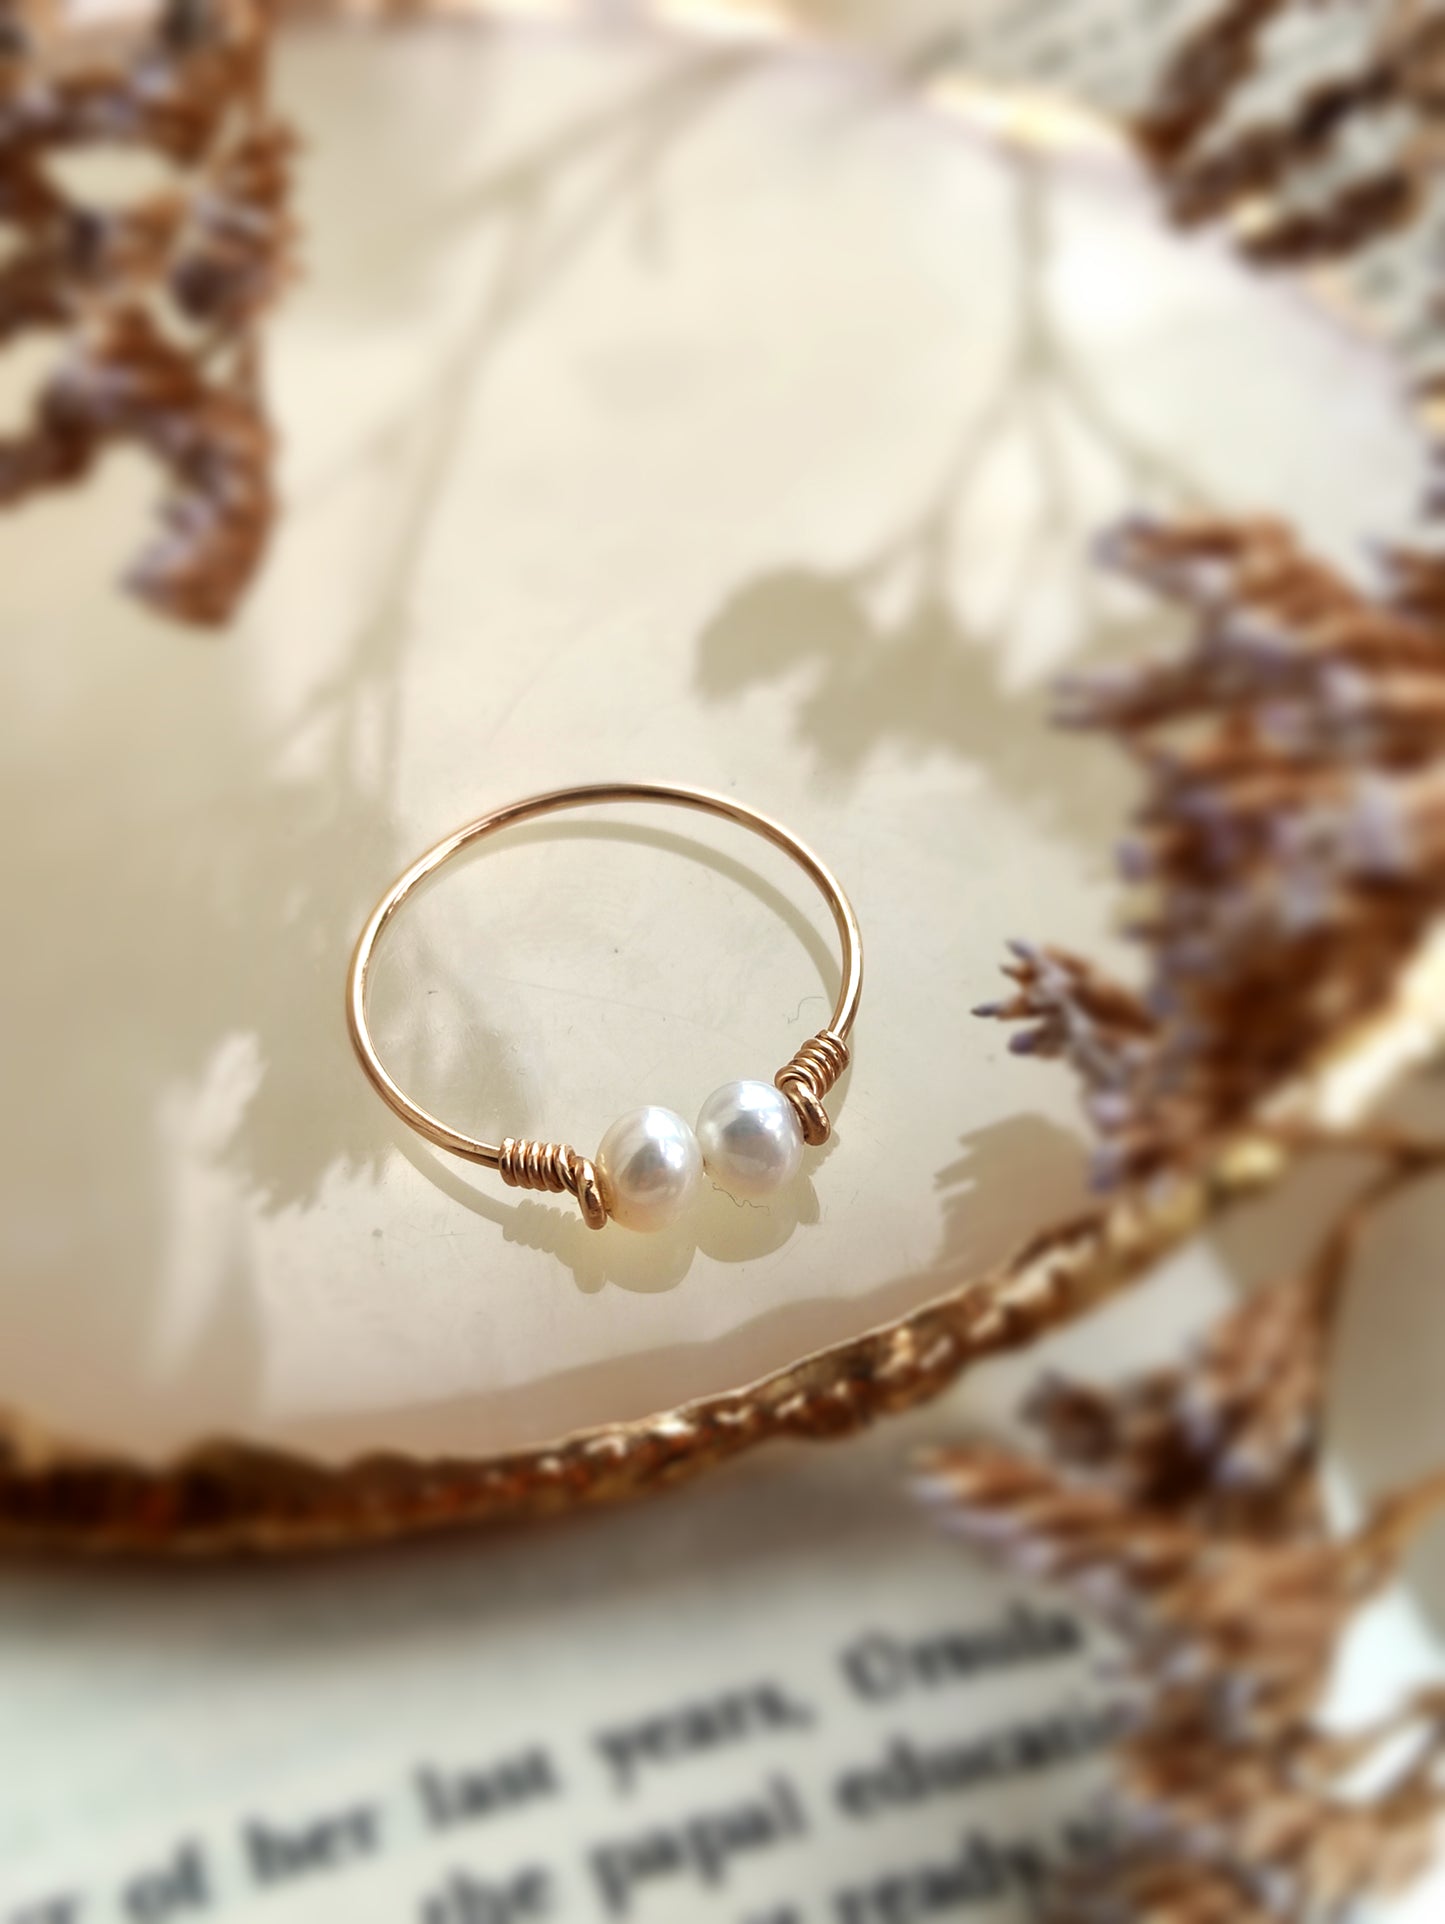 Double Pearl Ring, Dainty Two Freshwater Pearl Ring